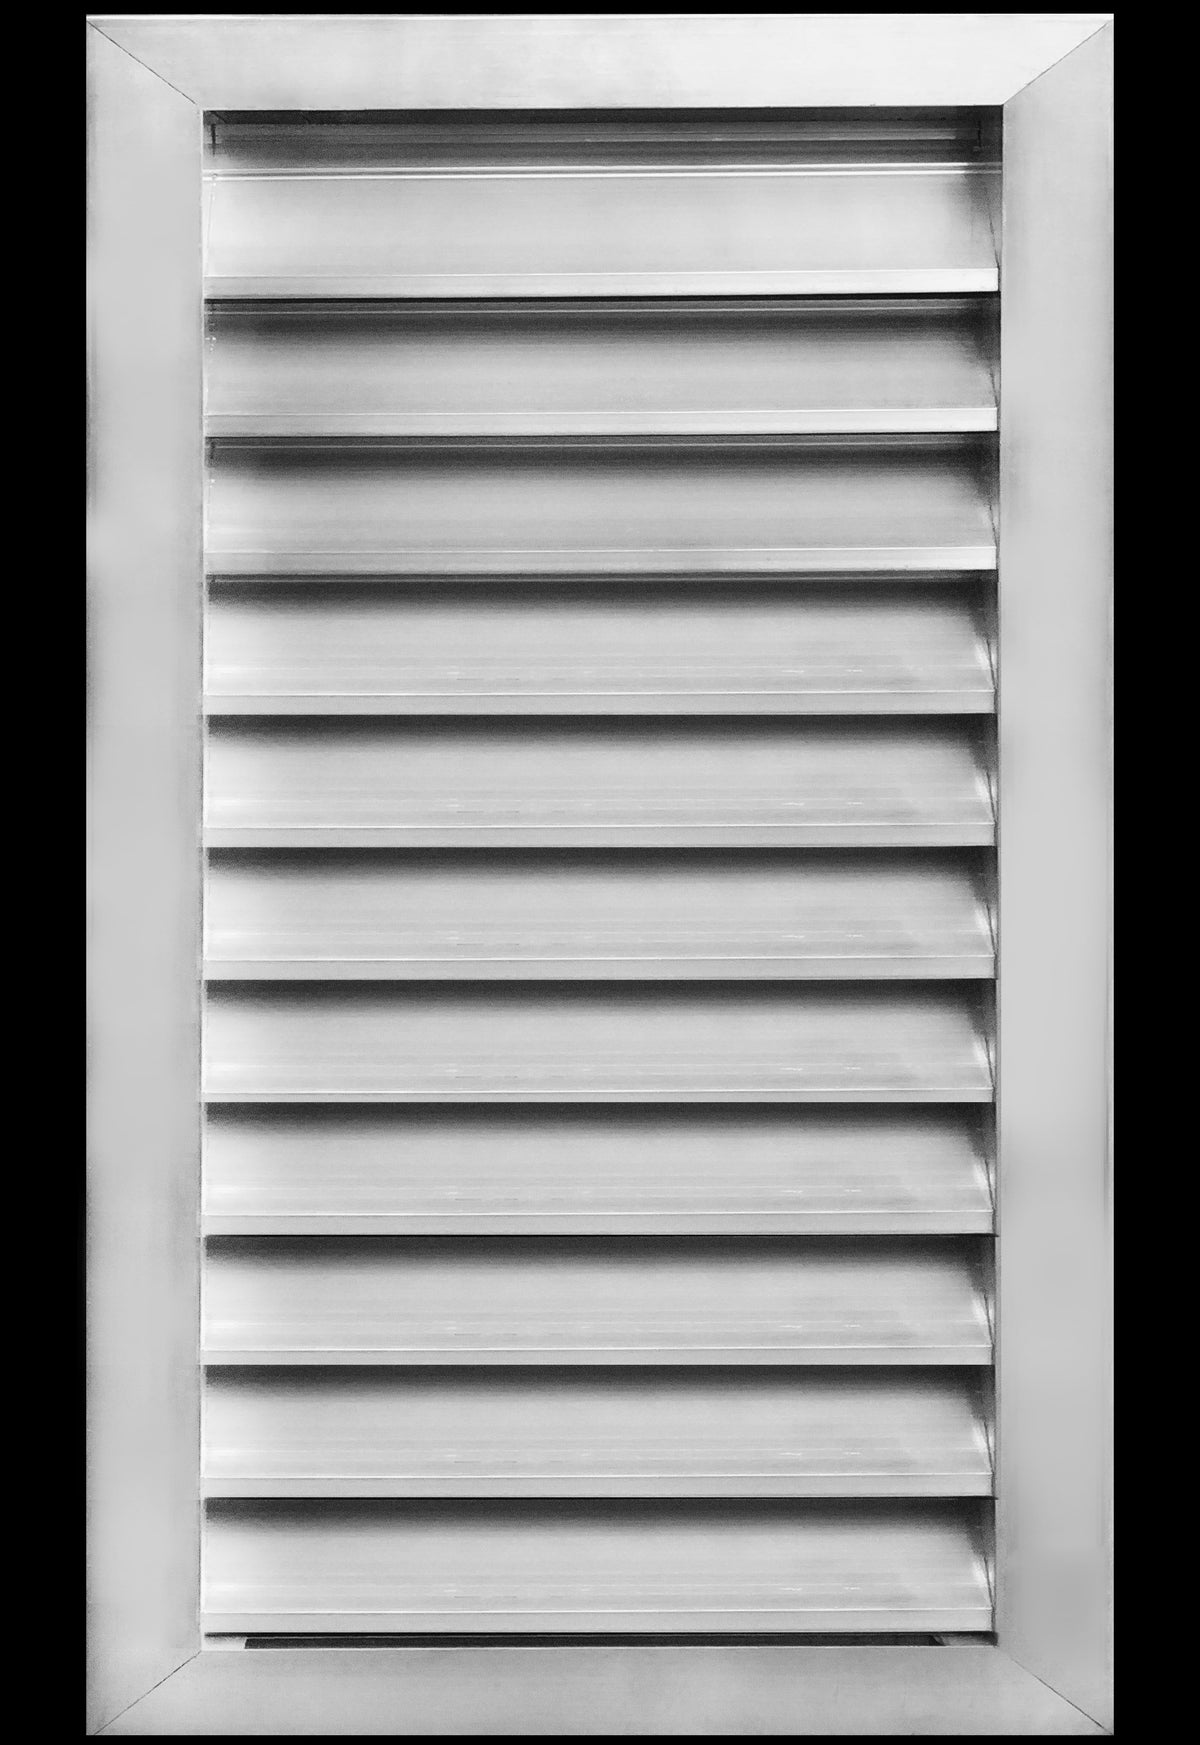 14&quot;w X 24&quot;h Aluminum Outdoor Weather Proof Louvers - Rain &amp; Waterproof Air Vent With Screen Mesh